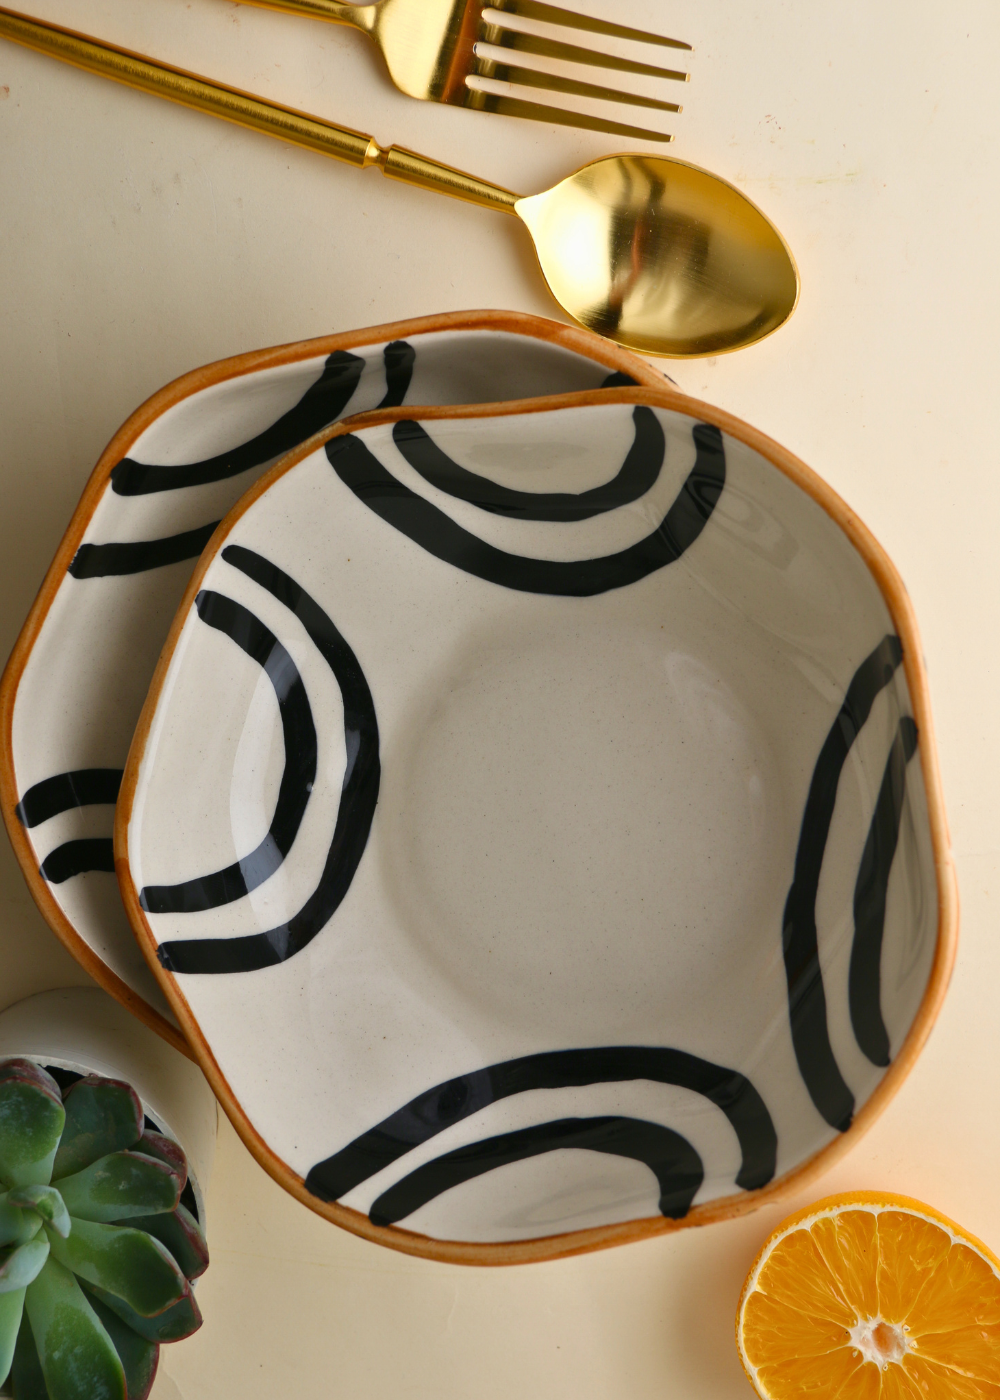  Two black and white bowl with cutleries and orange